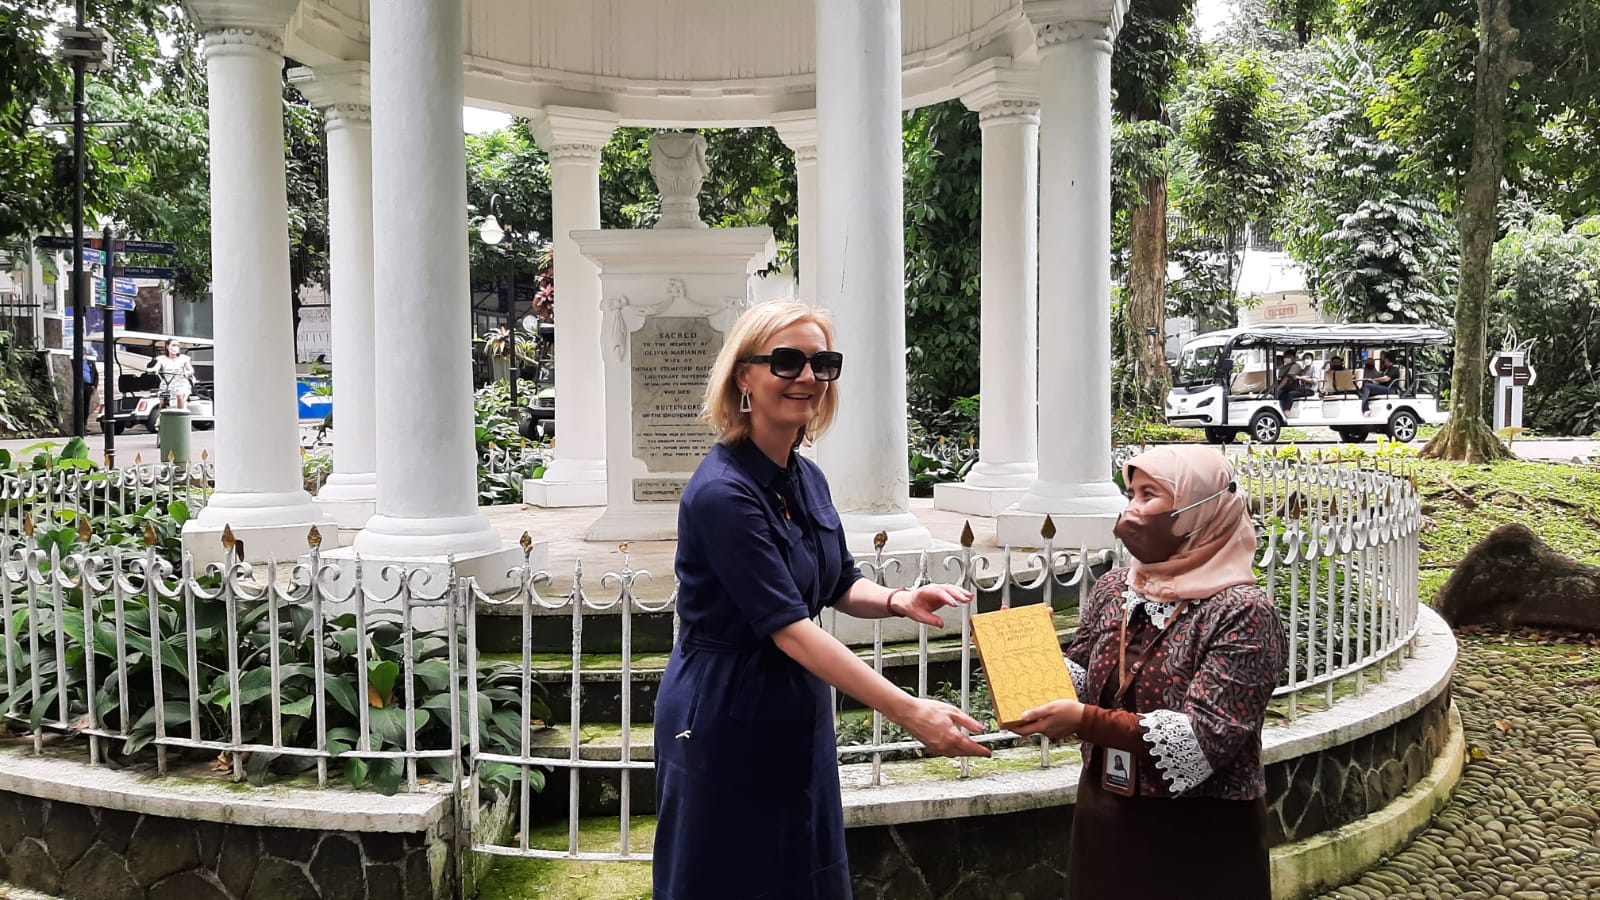 Dr Dian Latifah stood next to Liz Truss presenting her with a book. They are stood in front of a round memorial building of 8 large white pillars with a central plinth with a plaque on.